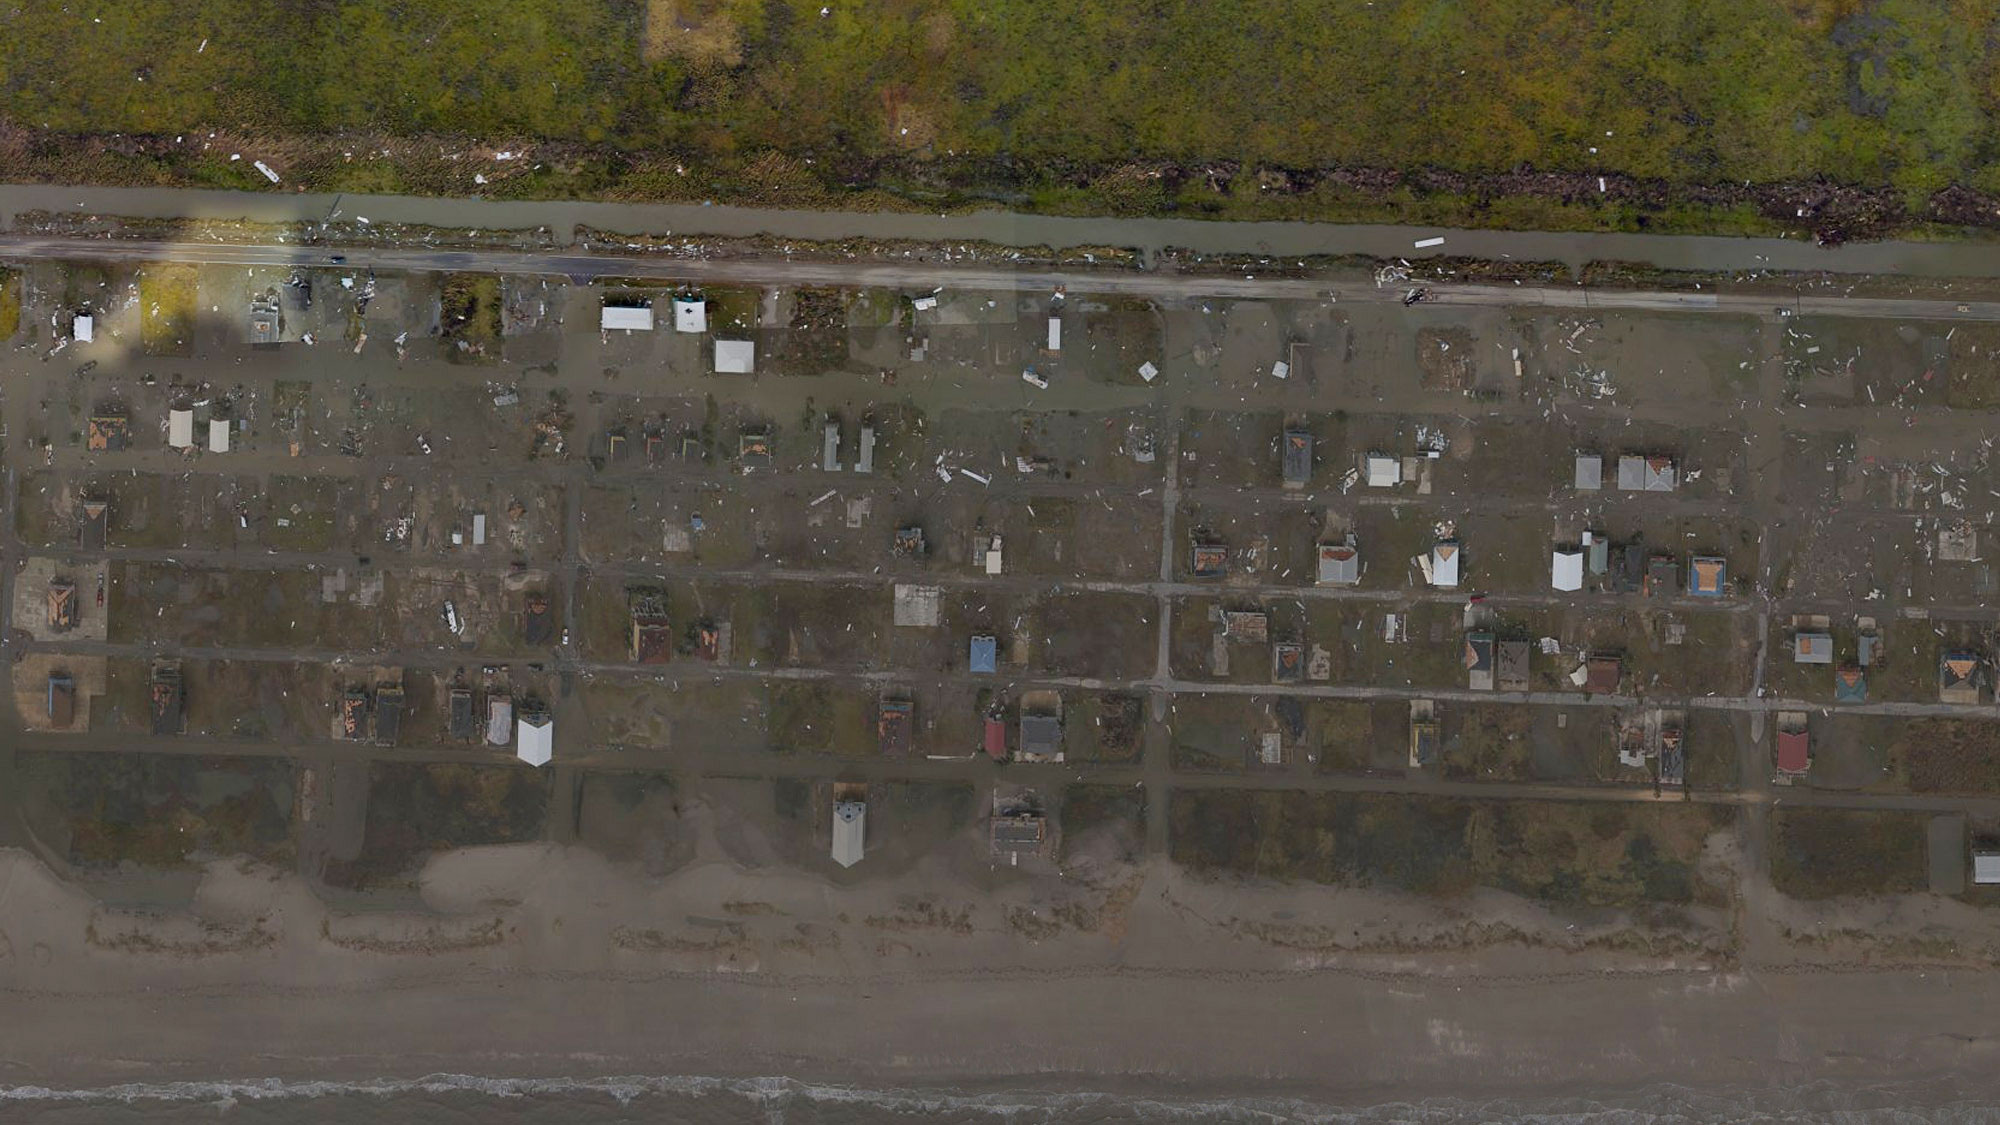 an image showing the area near Holly Beach, Louisiana before Laura